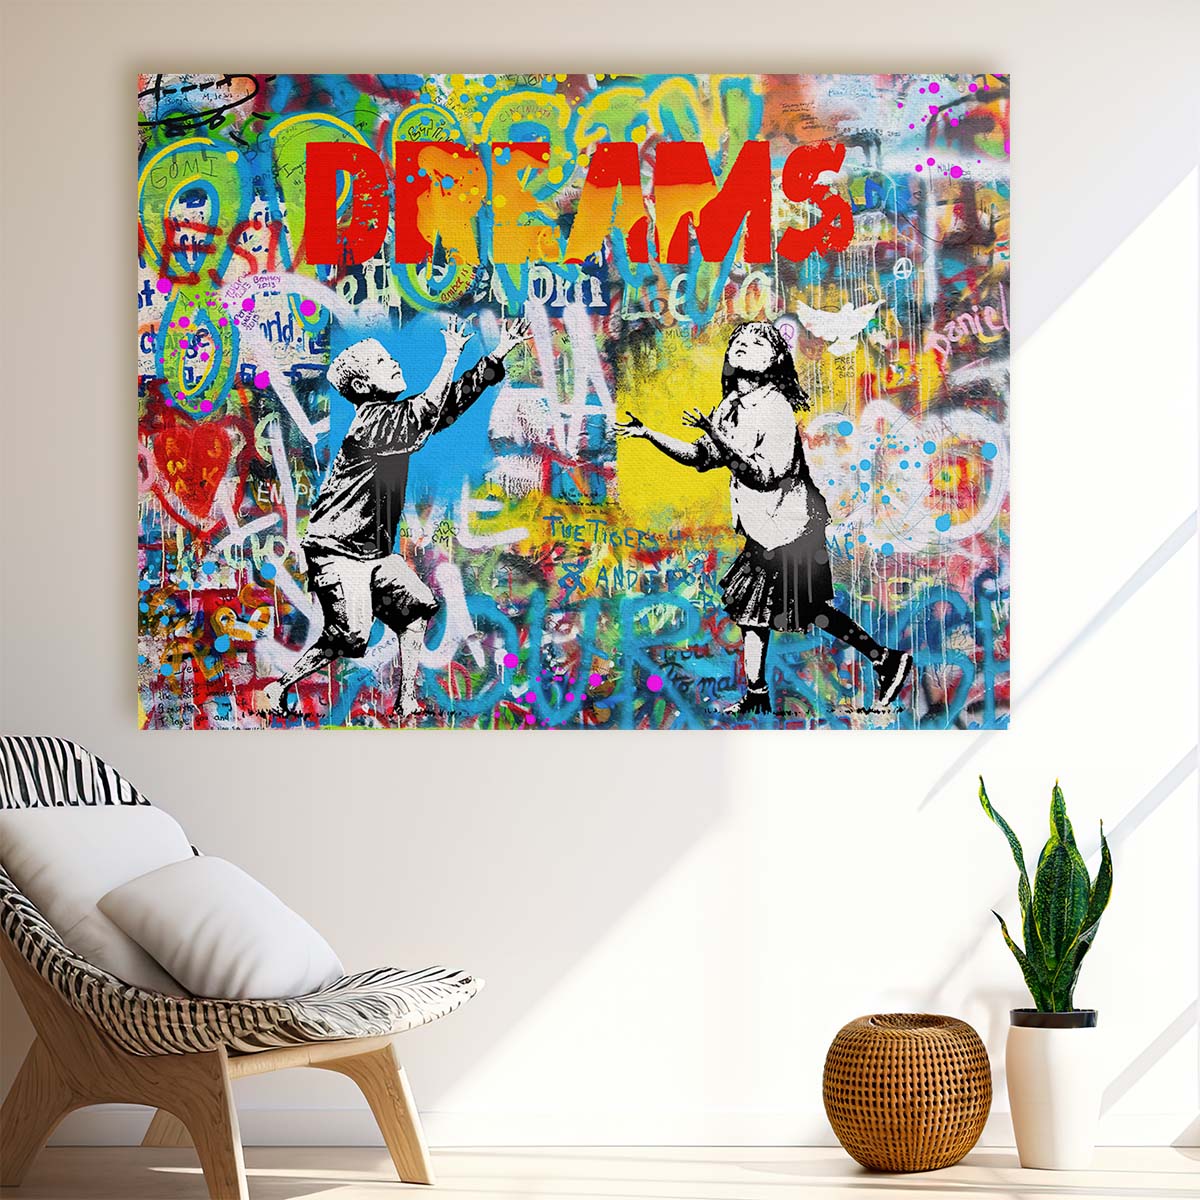 Banksy Dreams Graffiti Wall Art by Luxuriance Designs. Made in USA.